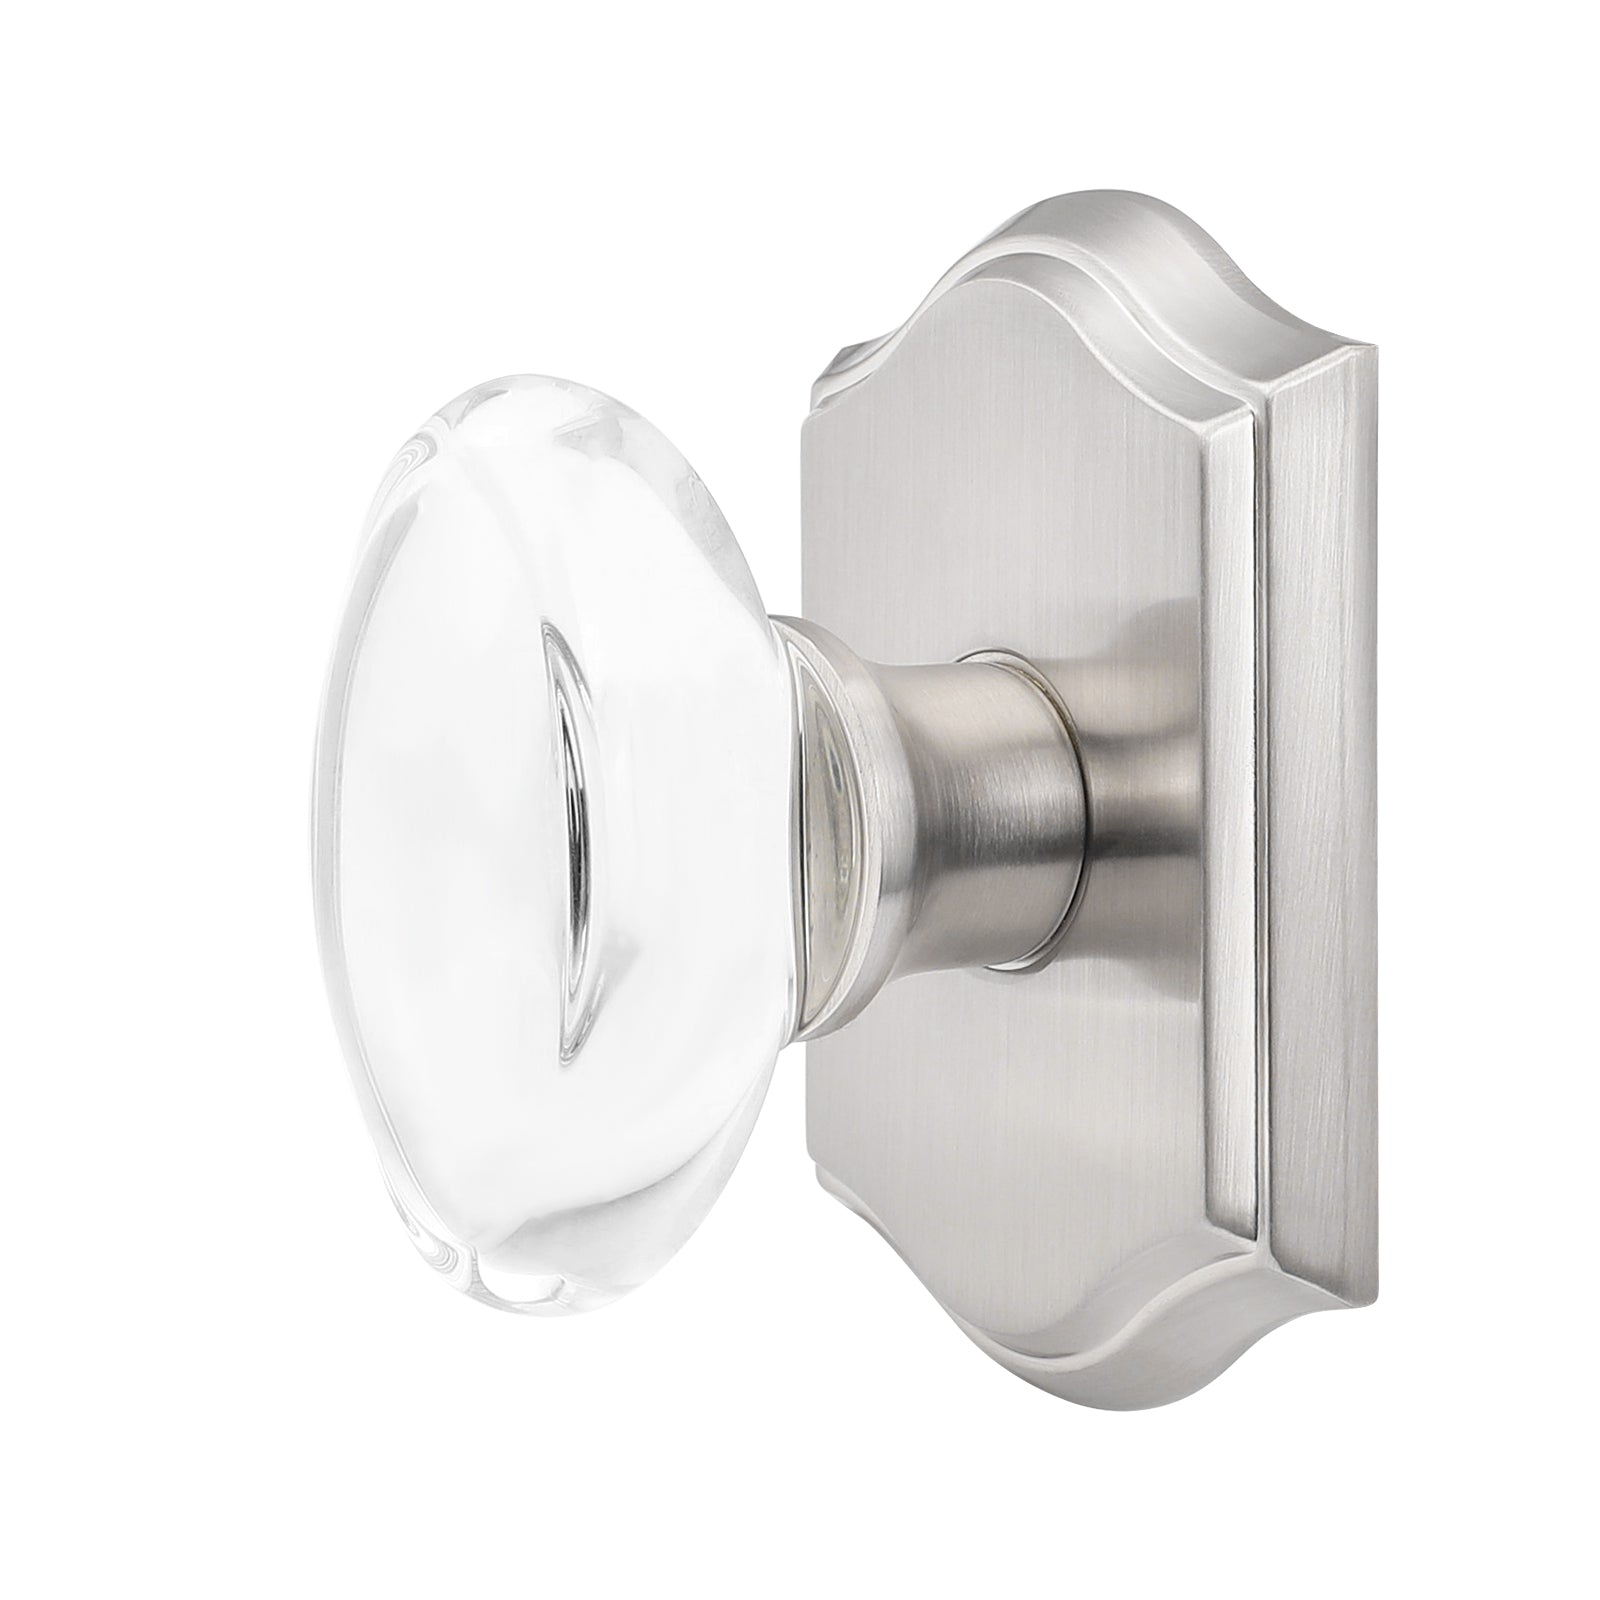 Oval Crystal Door Knob Lock with Satin Nickel Arched Rosette DLC9SN